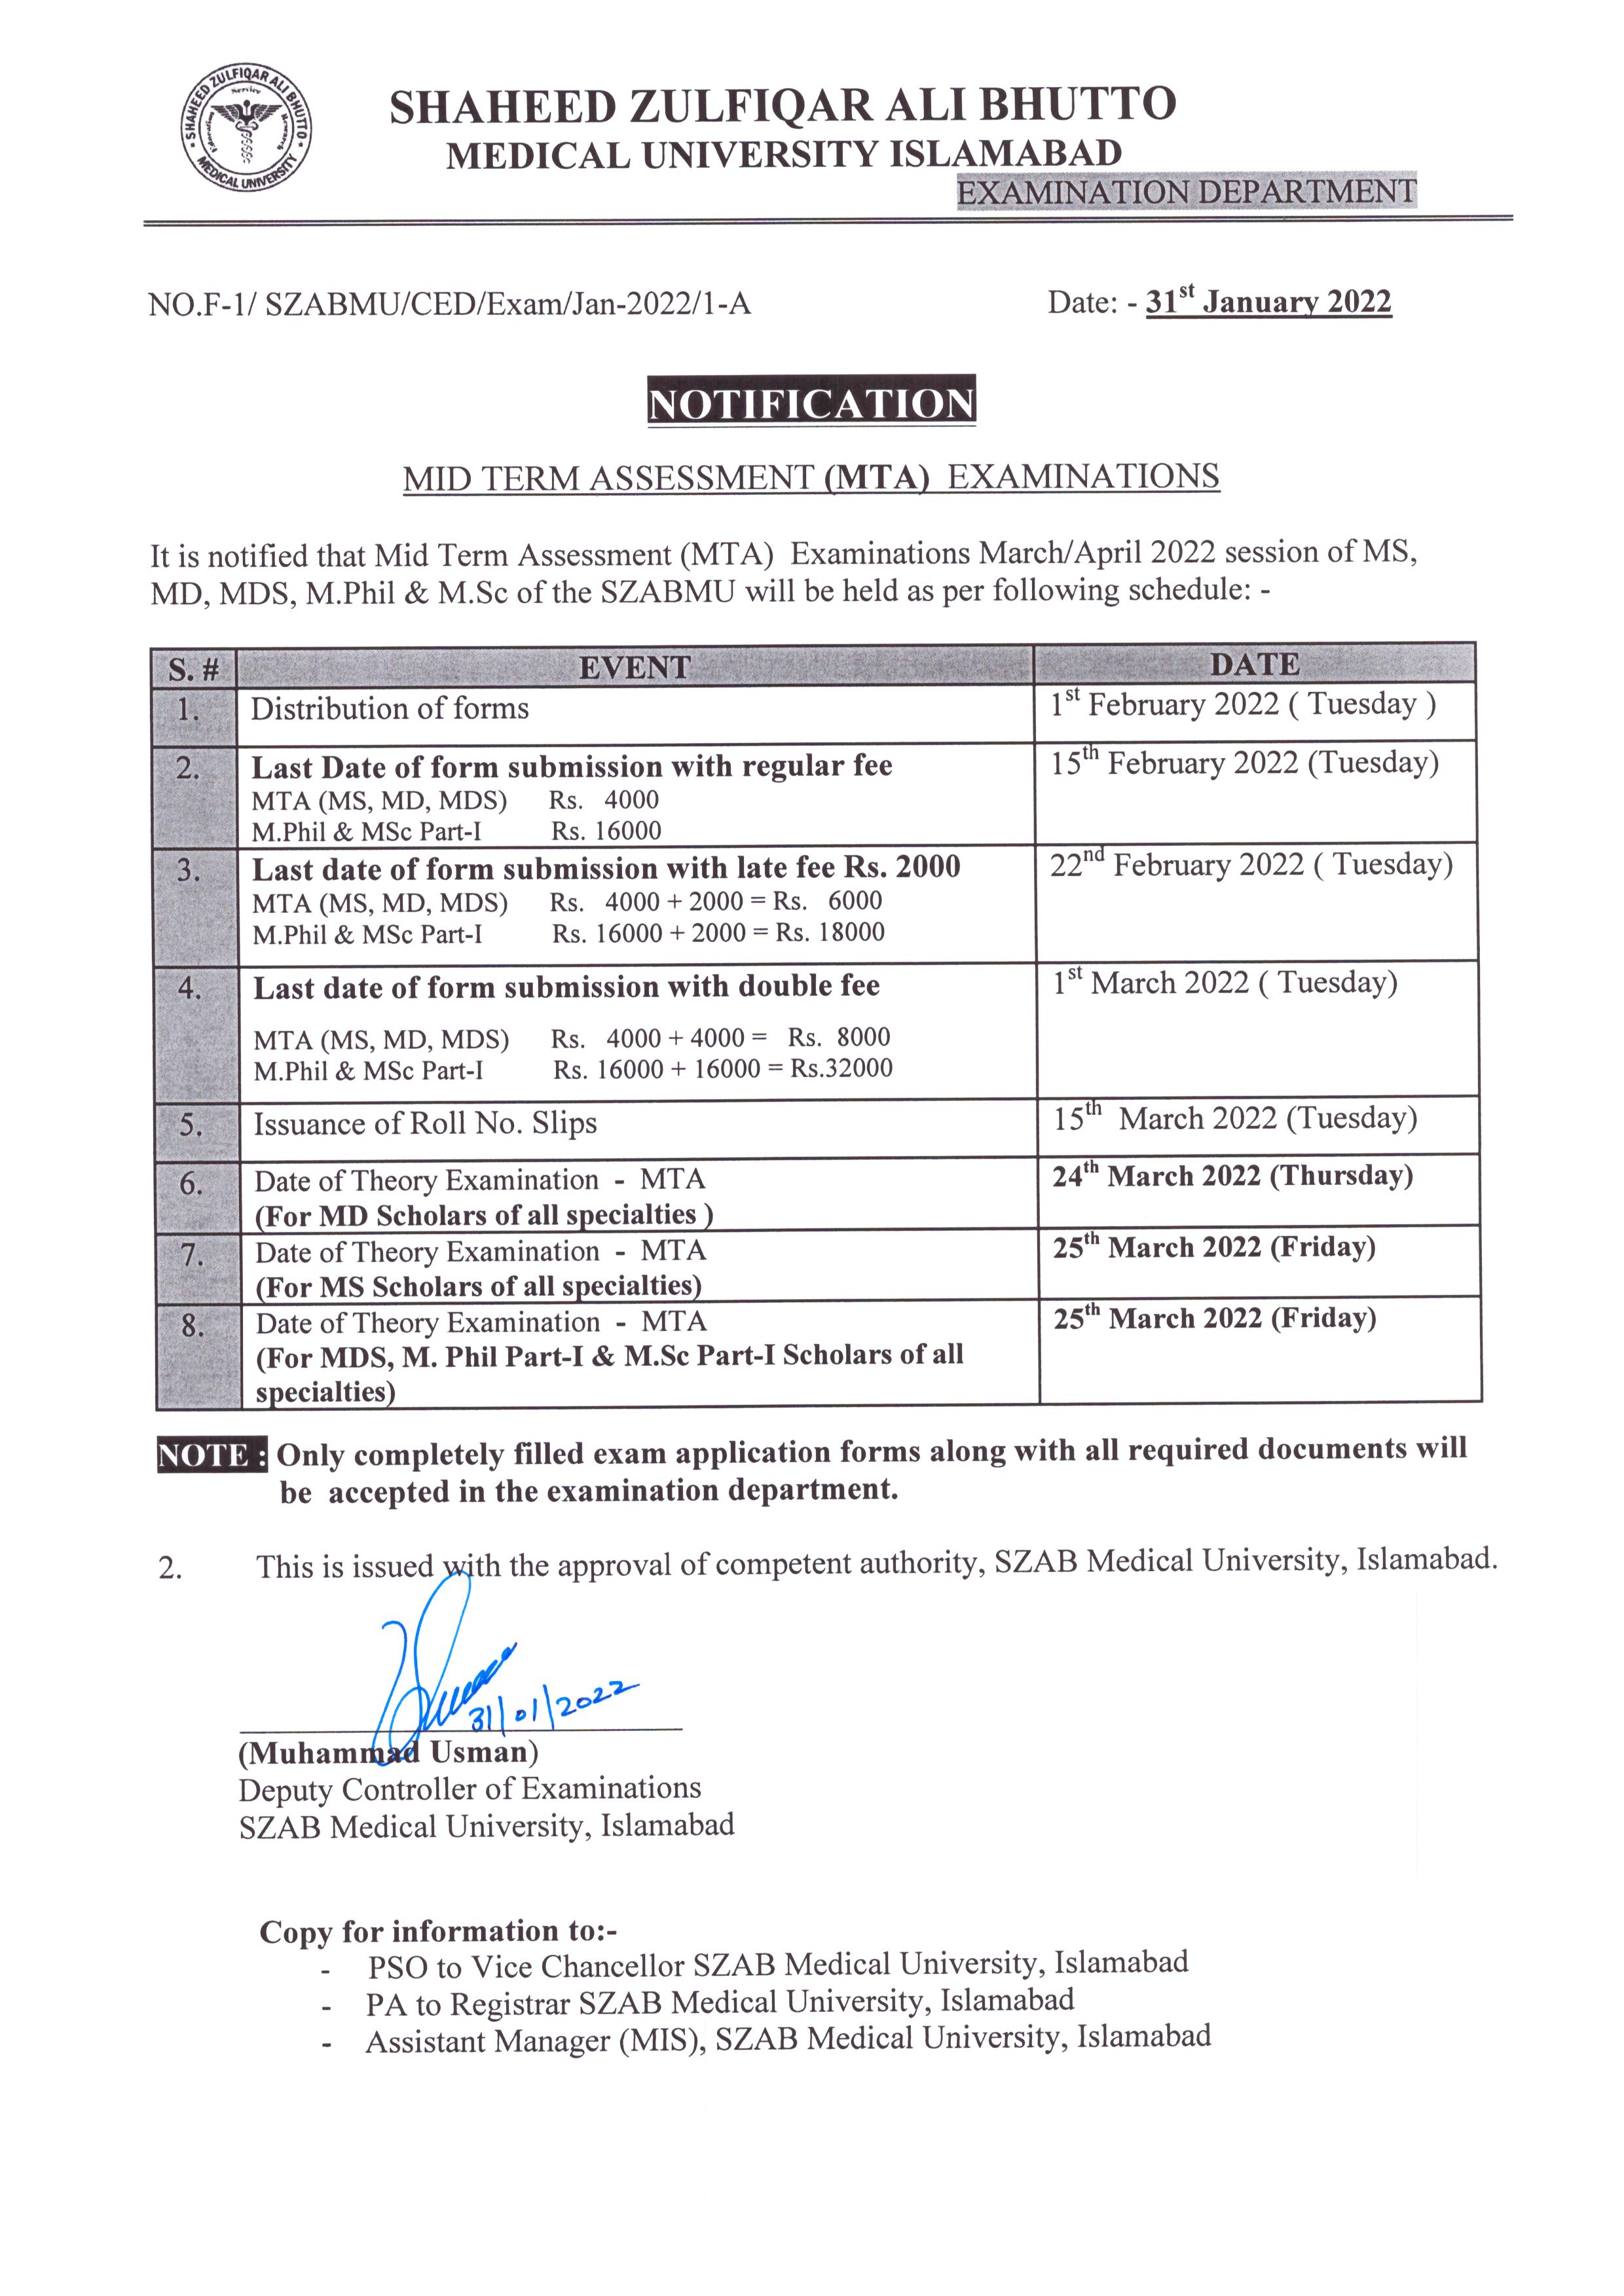 Notifications - MTA Examinations March/April Session 2022 of MS,MD,MDS,M.phil & MSc